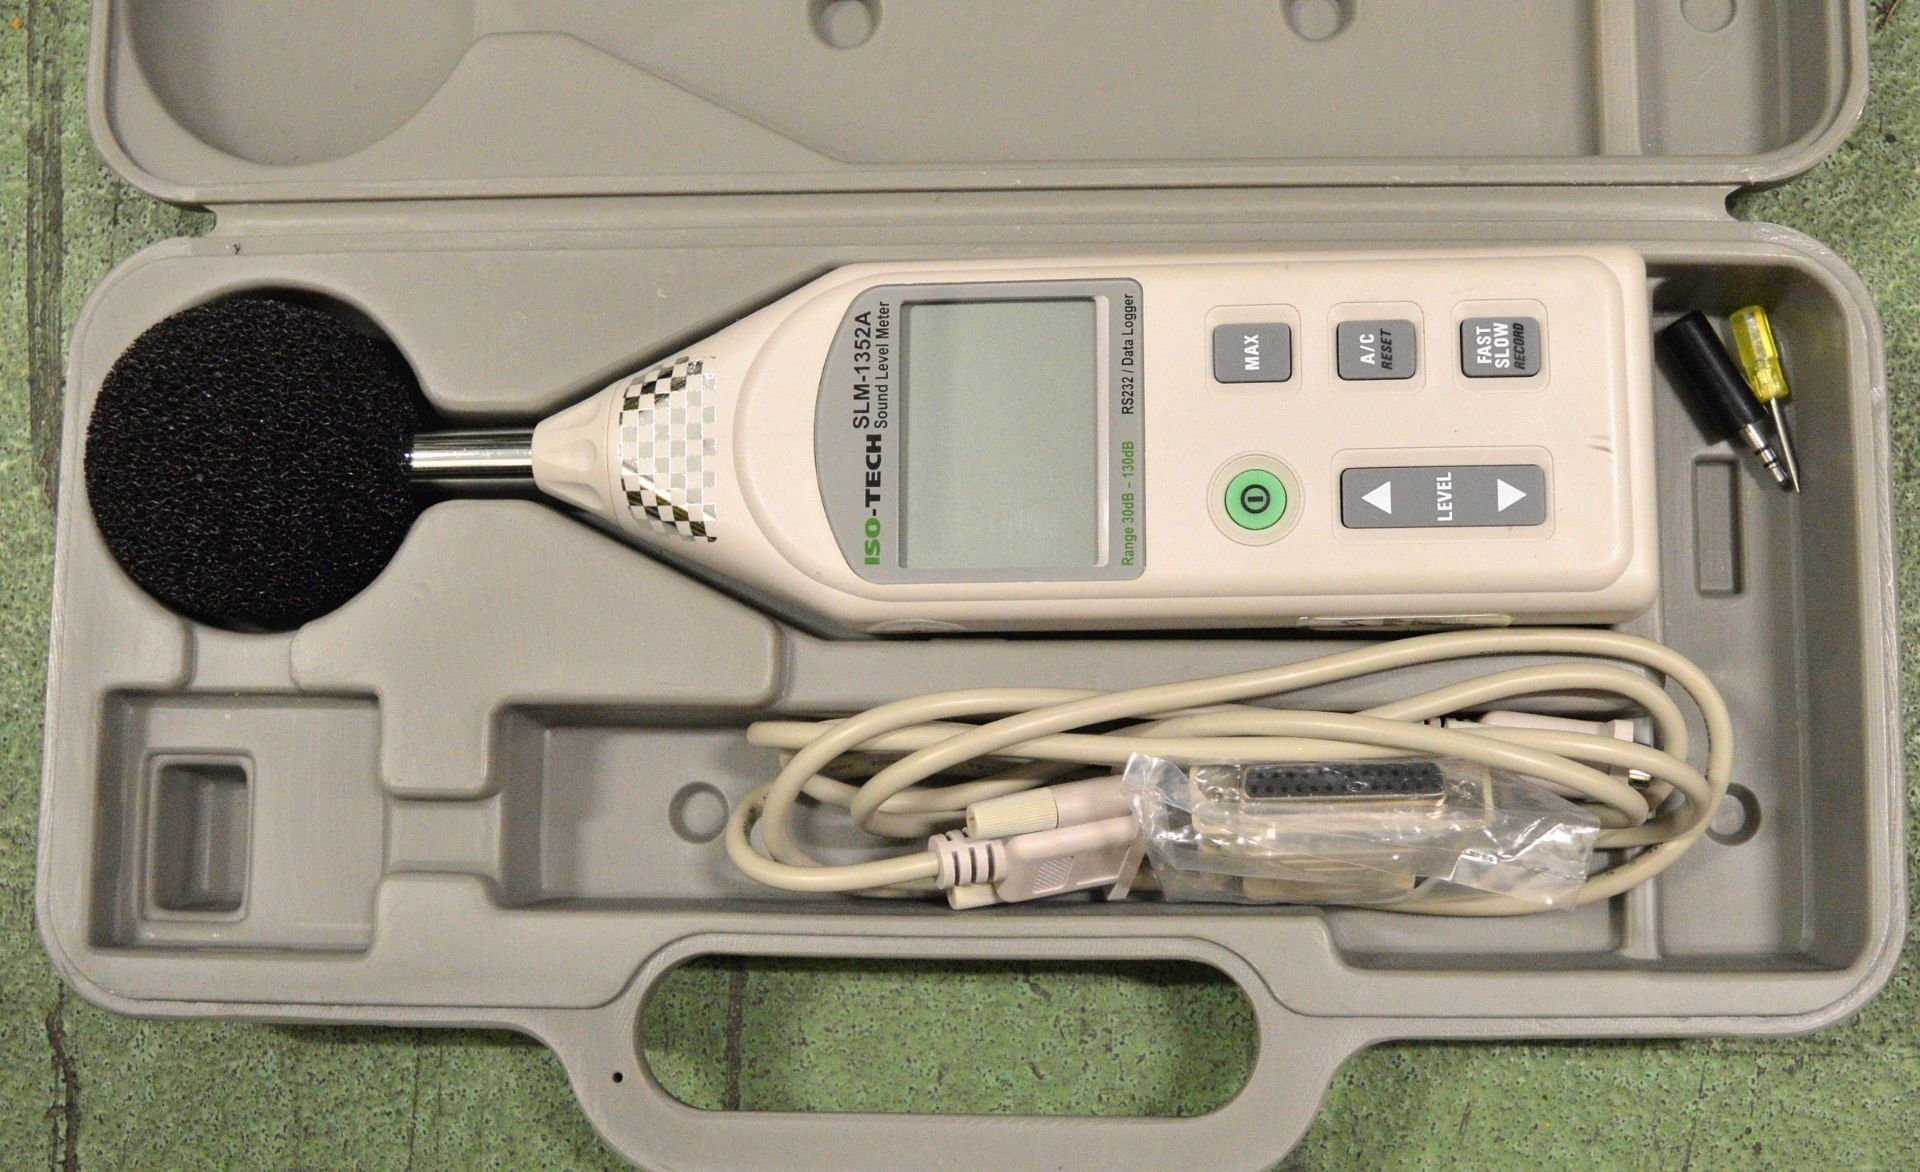 ISO-TECH Sound Level Meter Range 30dB-130dB - SLM-1352A in case - Image 2 of 3